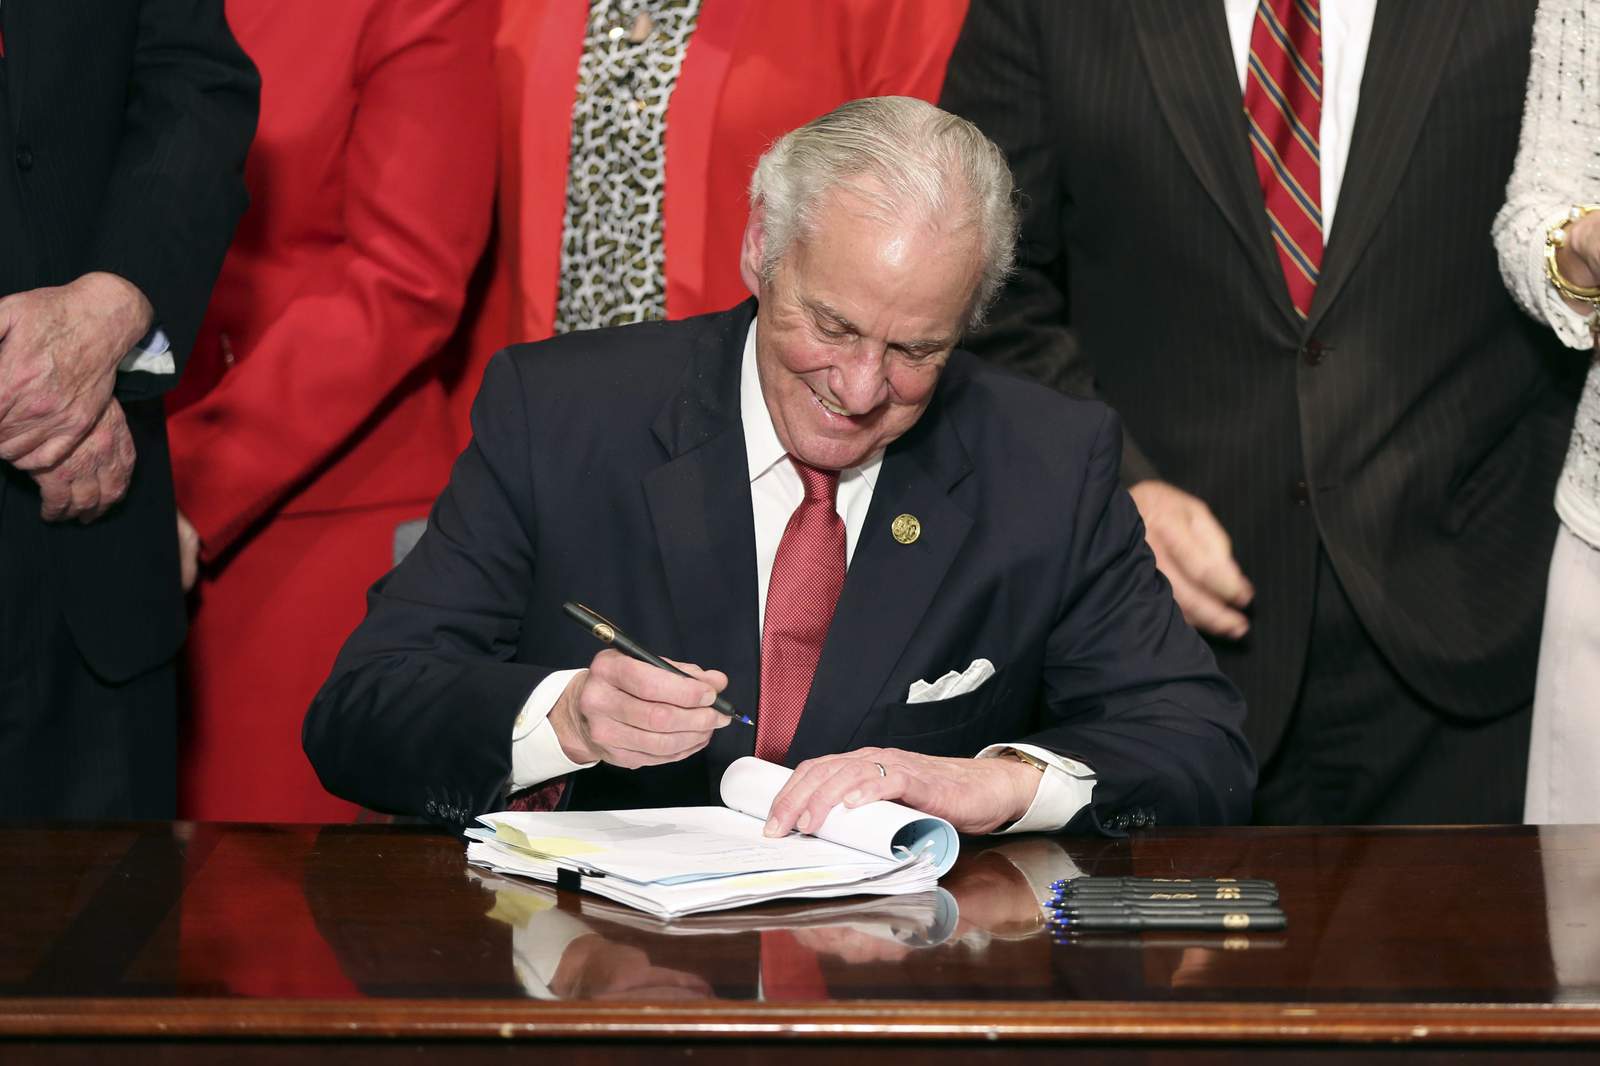 SC governor signs abortion ban; Planned Parenthood sues